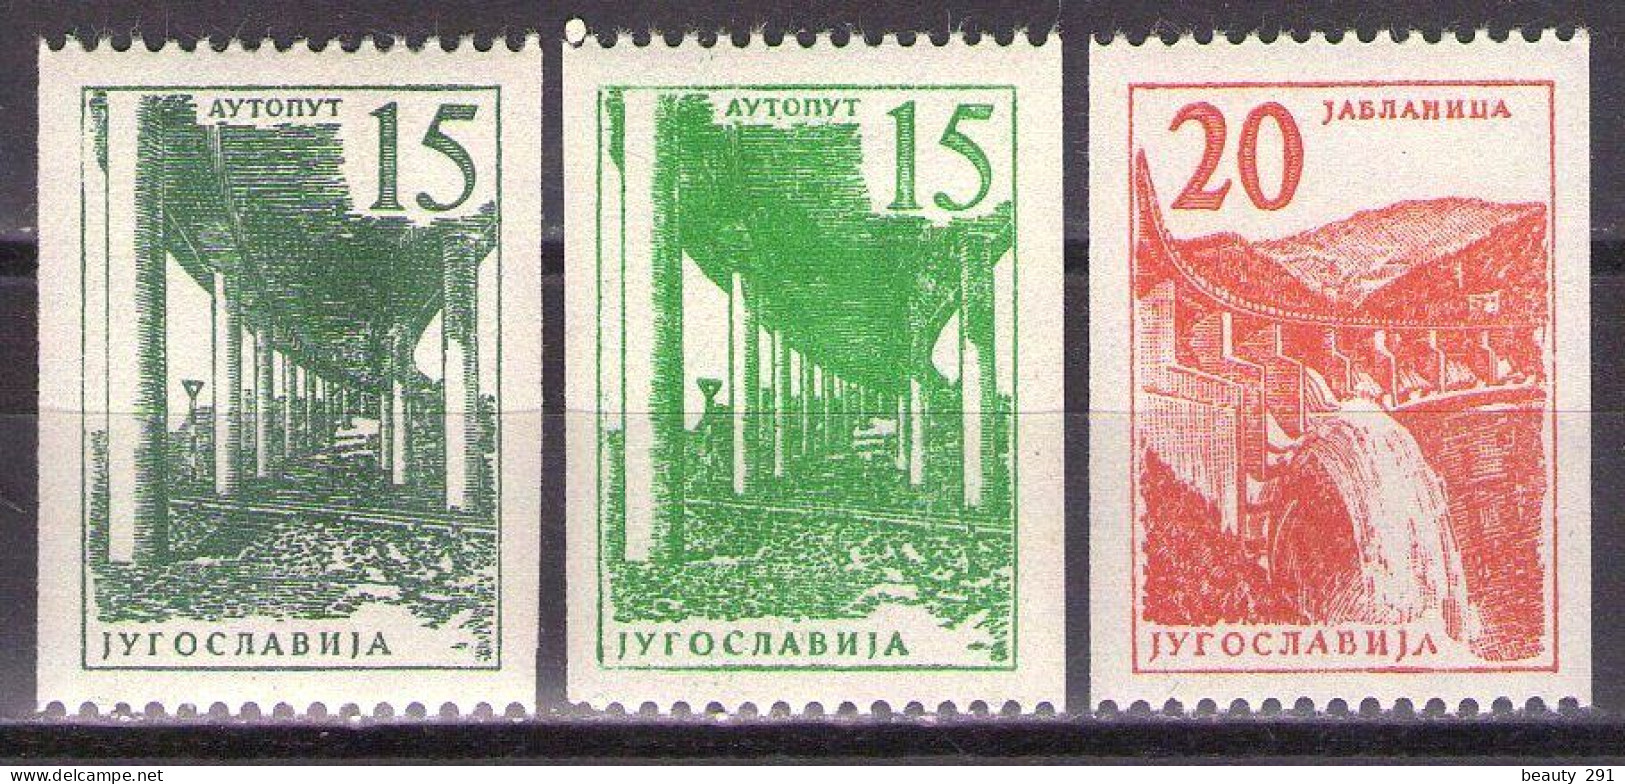 Yugoslavia 1959 - Industry And Architecture Coil Stamps - Mi 898-899a,b - MNH**VF - Nuevos